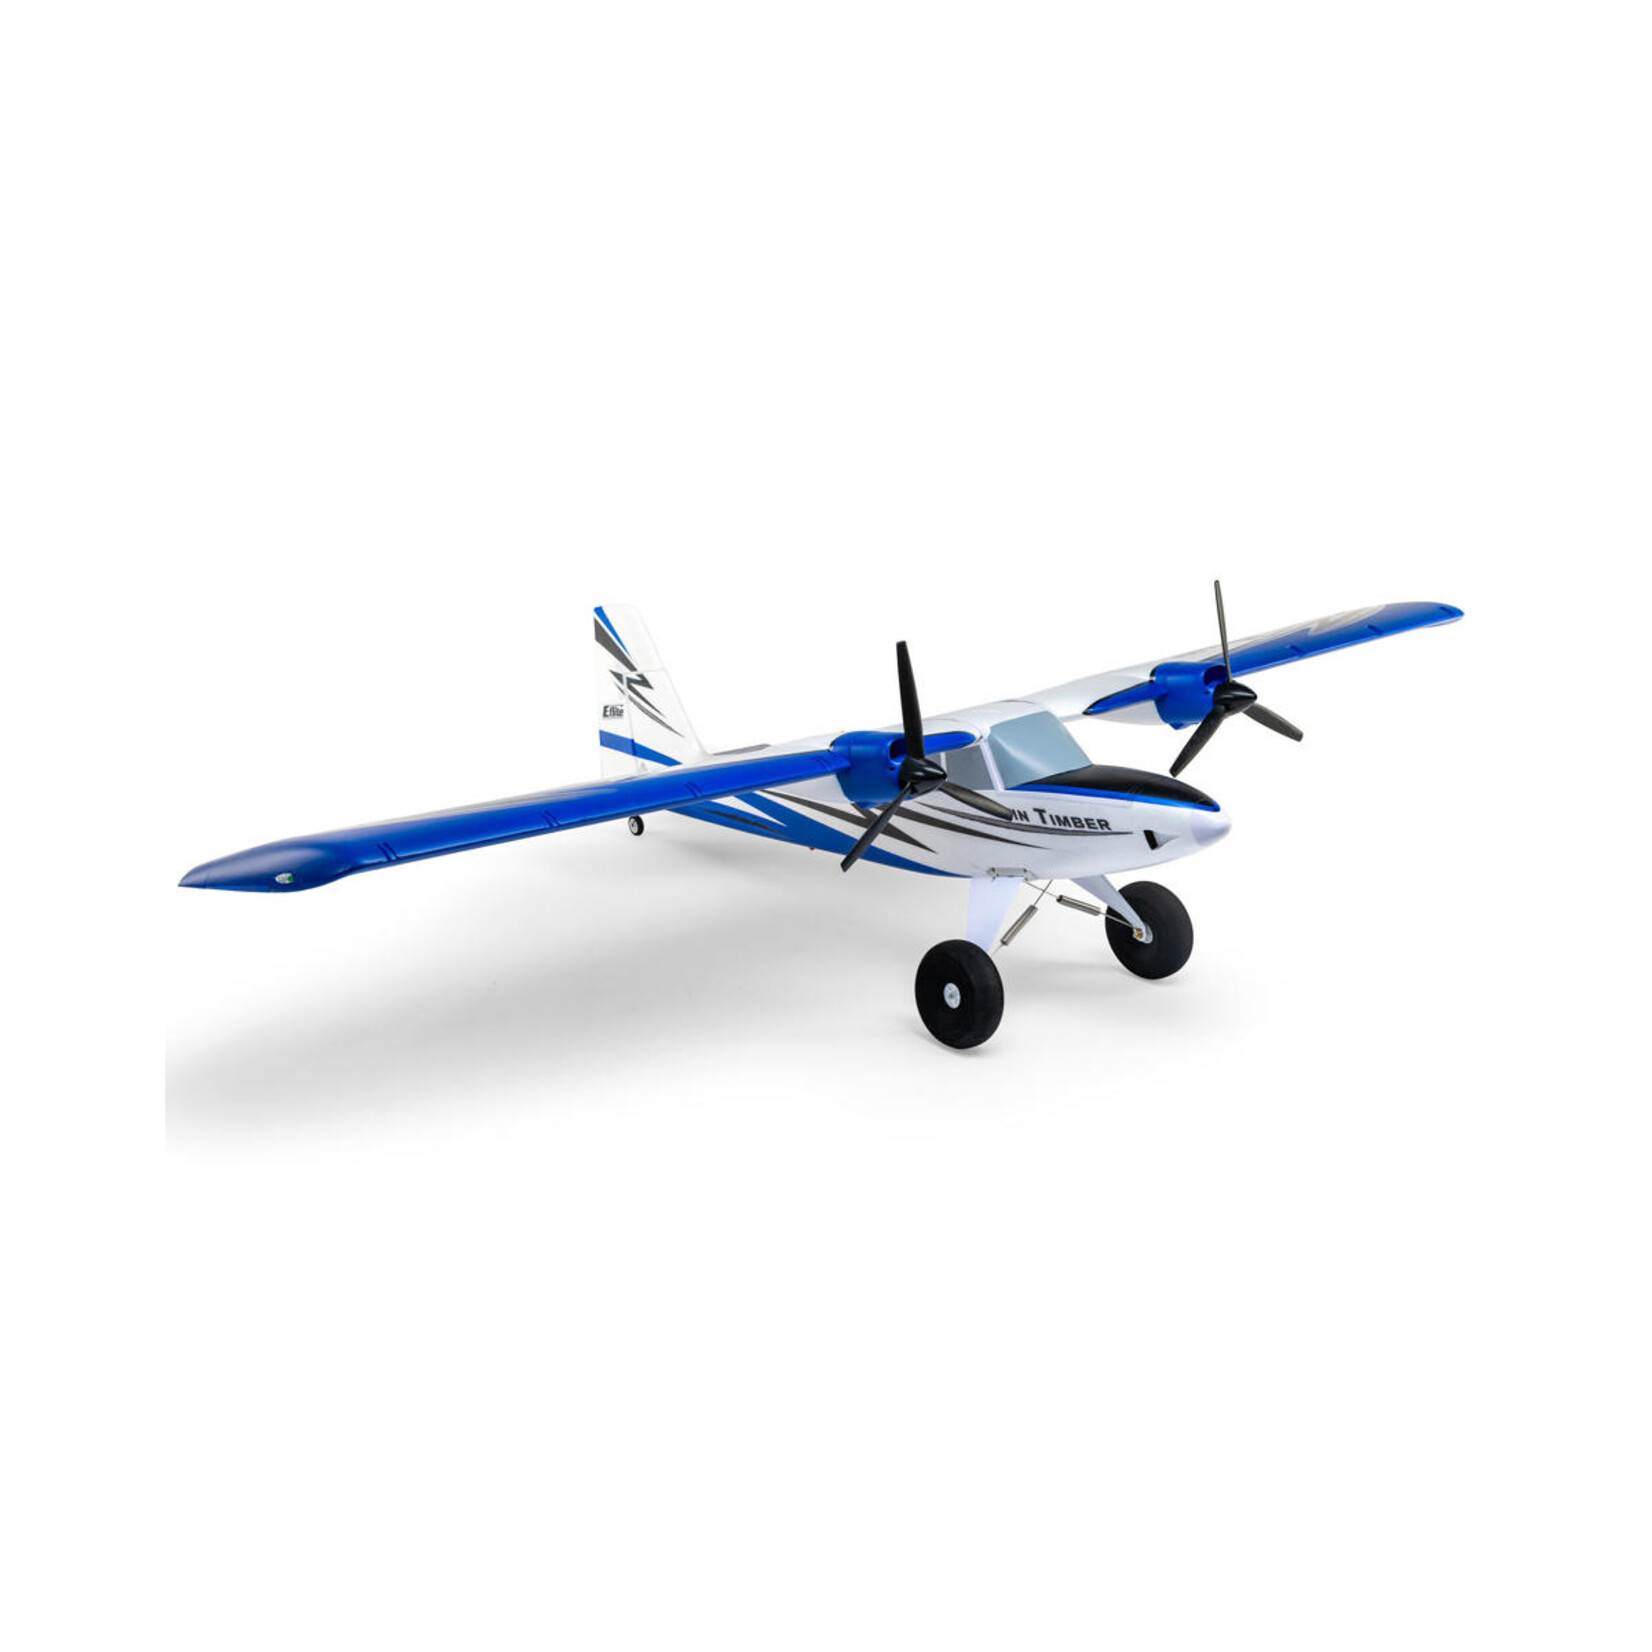 E-flite E-flite Twin Timber 1.6m BNF Basic Electric Airplane w/AS3X & Safe Select #EFL23850